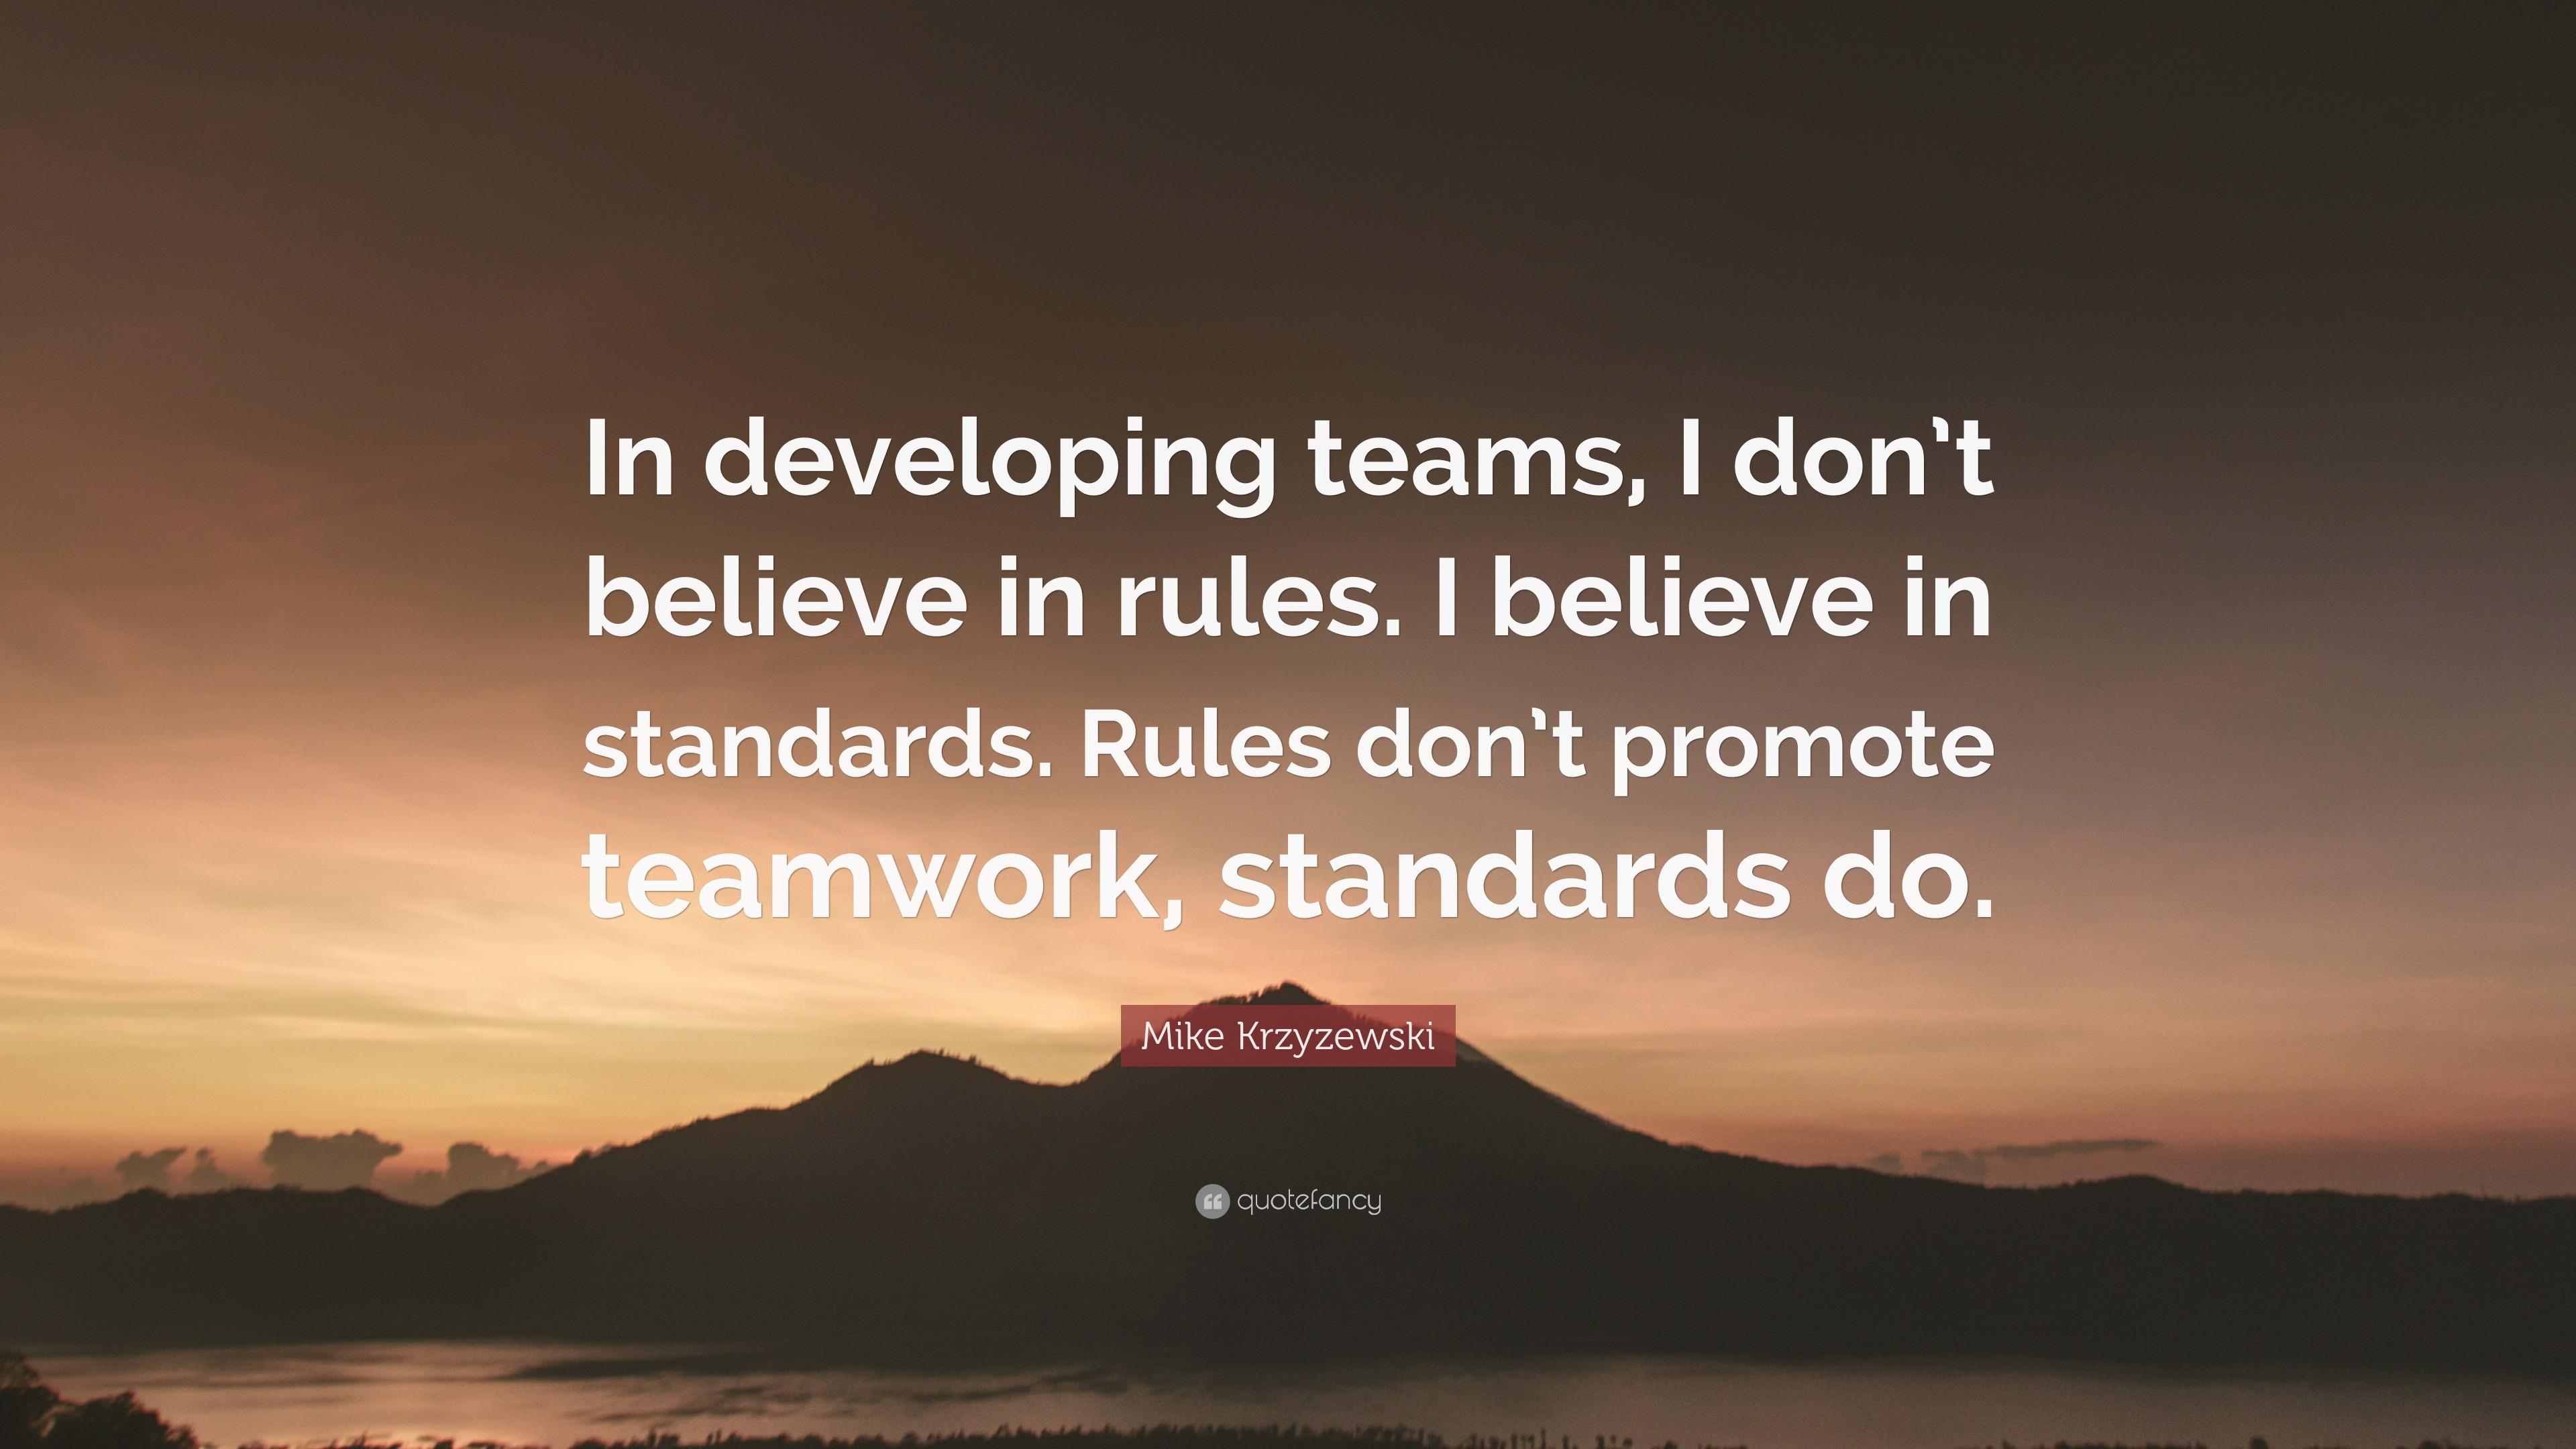 Mike Krzyzewski Quote: “In developing teams, I don’t believe in rules ...